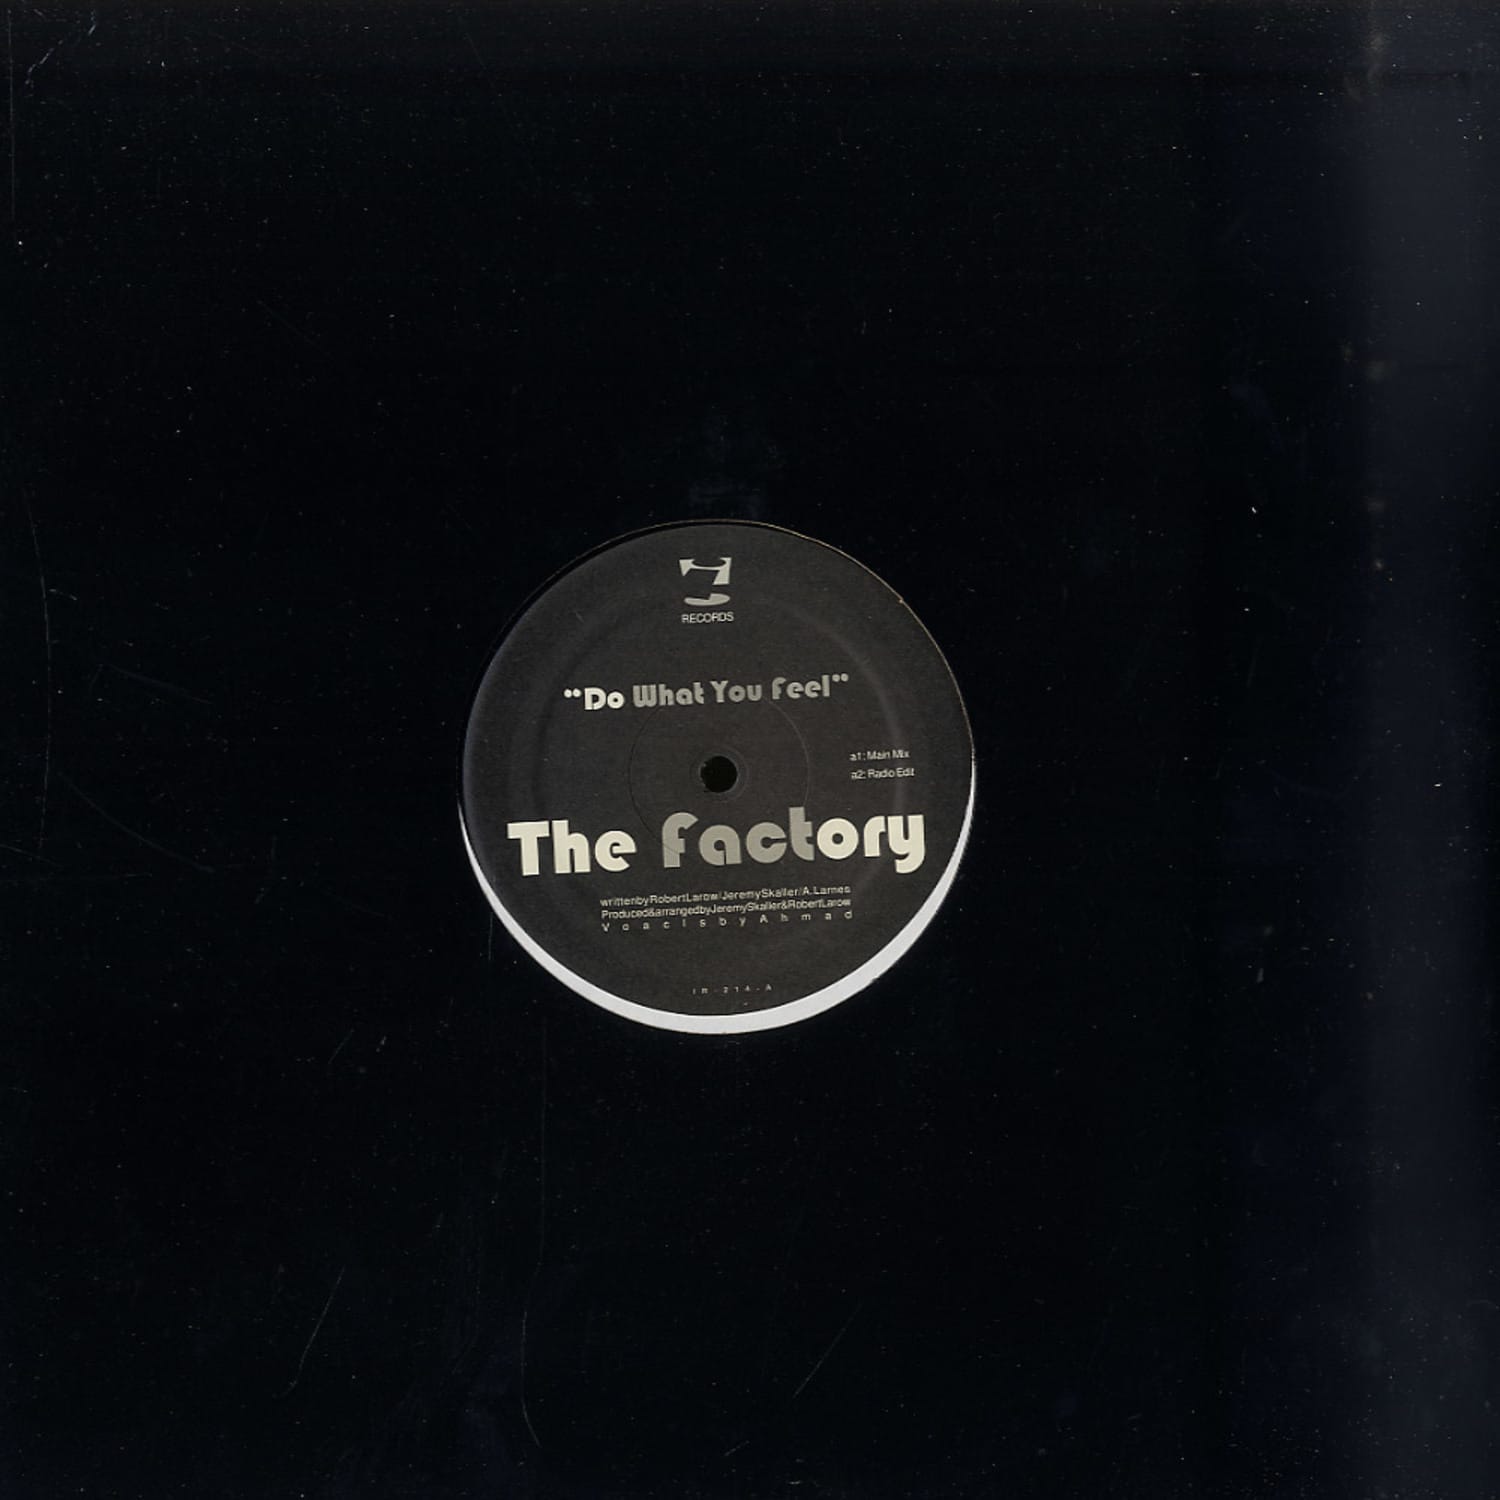 The Factory - DO WHAT YOU FEEL 